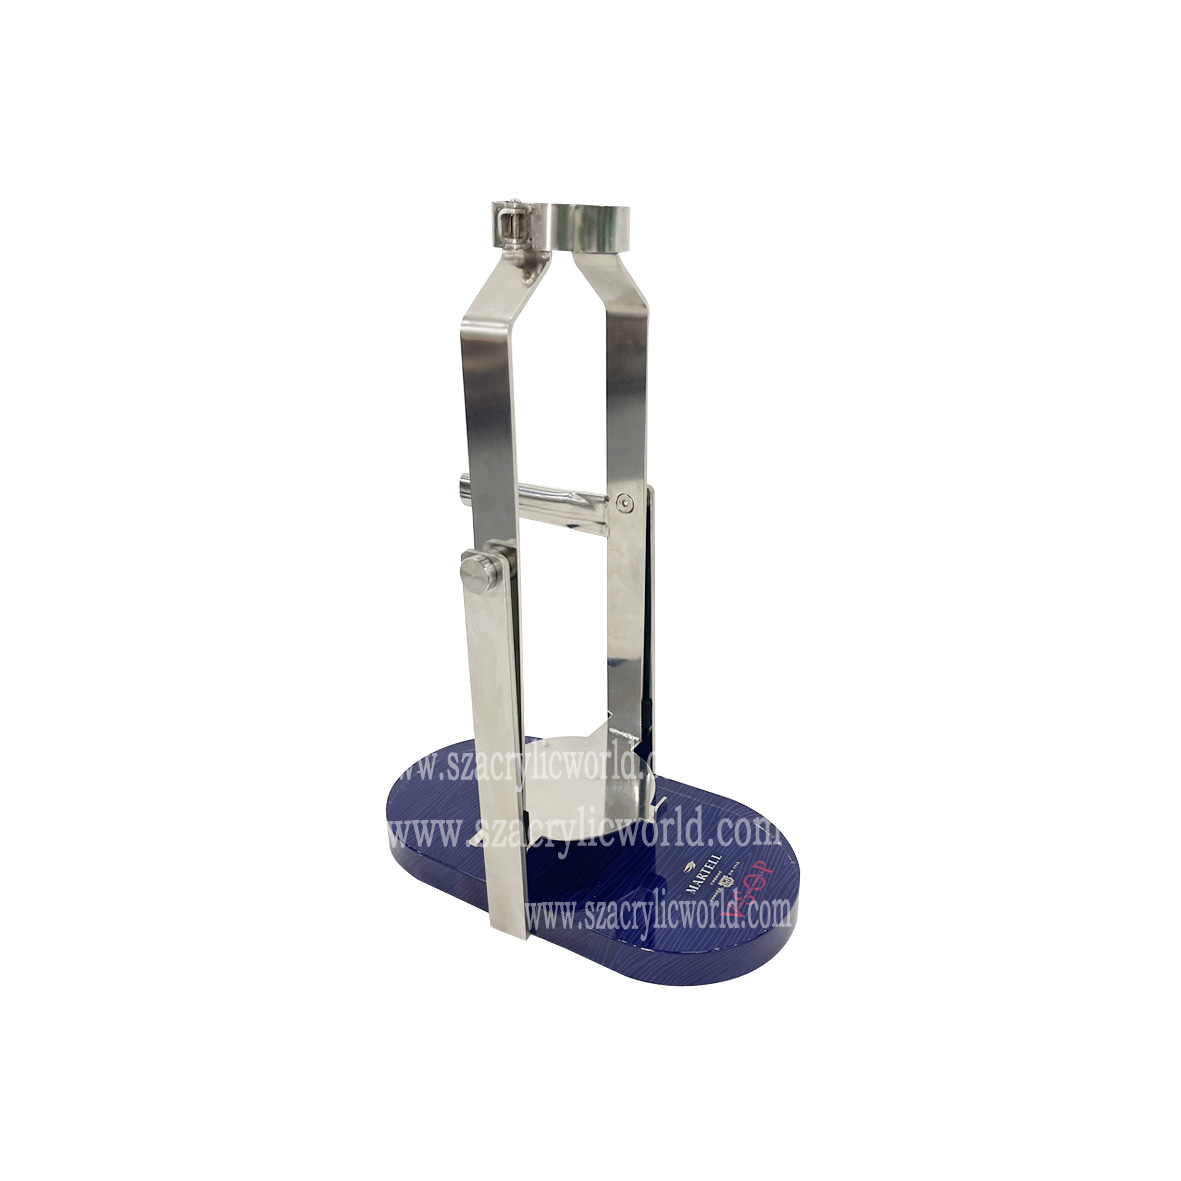 Acrylic World Limited Edition Metal and Acrylic Bar Display Stands